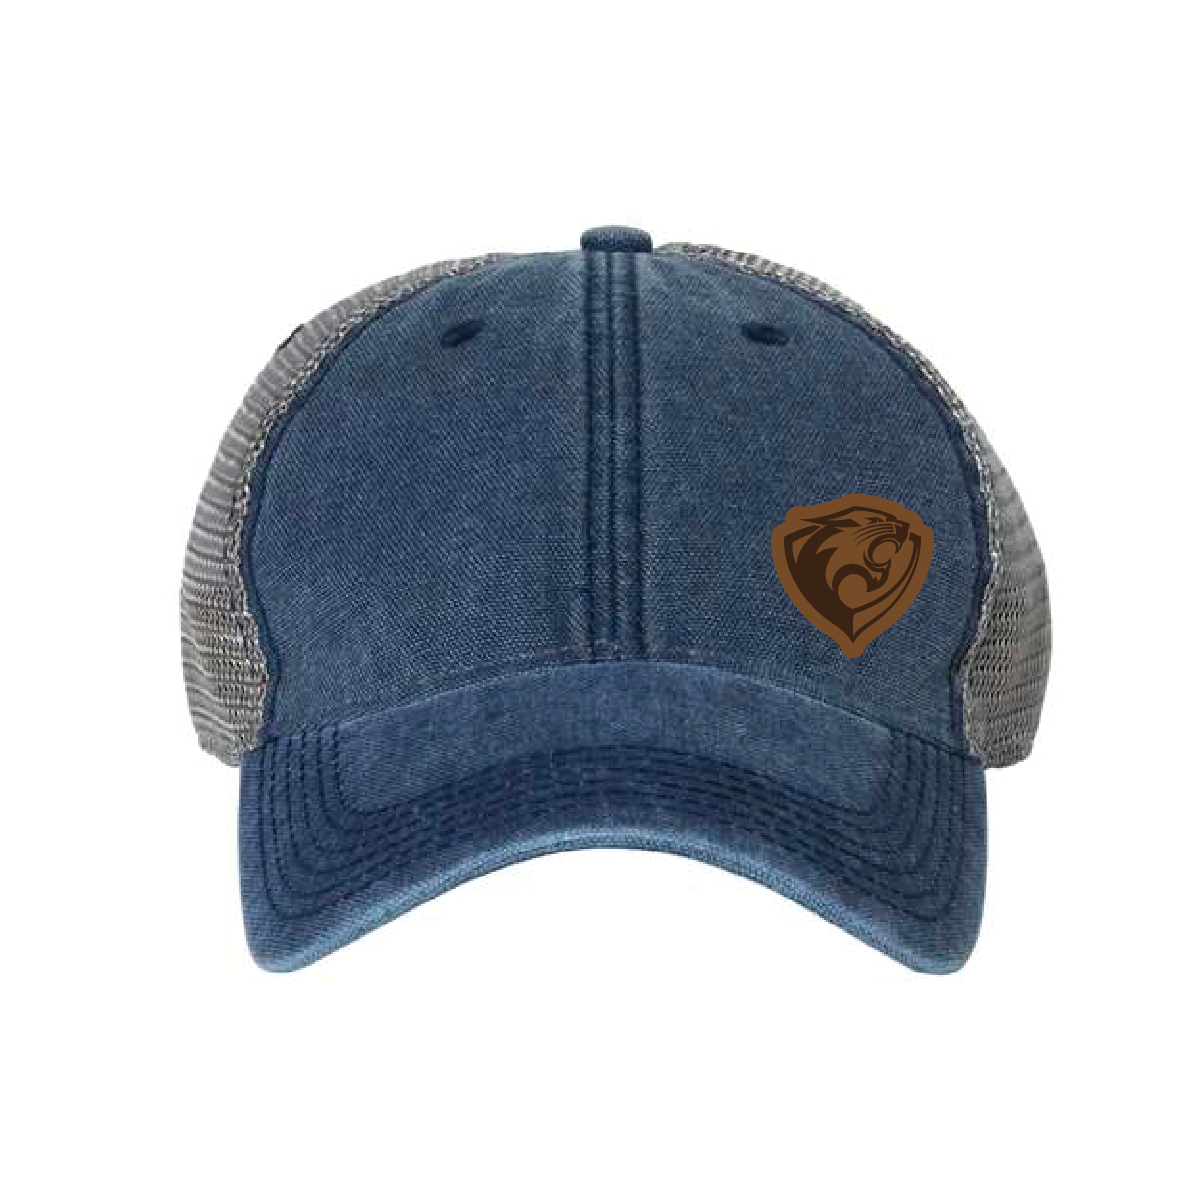 River Falls Retail Online Legacy Dashboard Trucker - Denim with Leather Patch